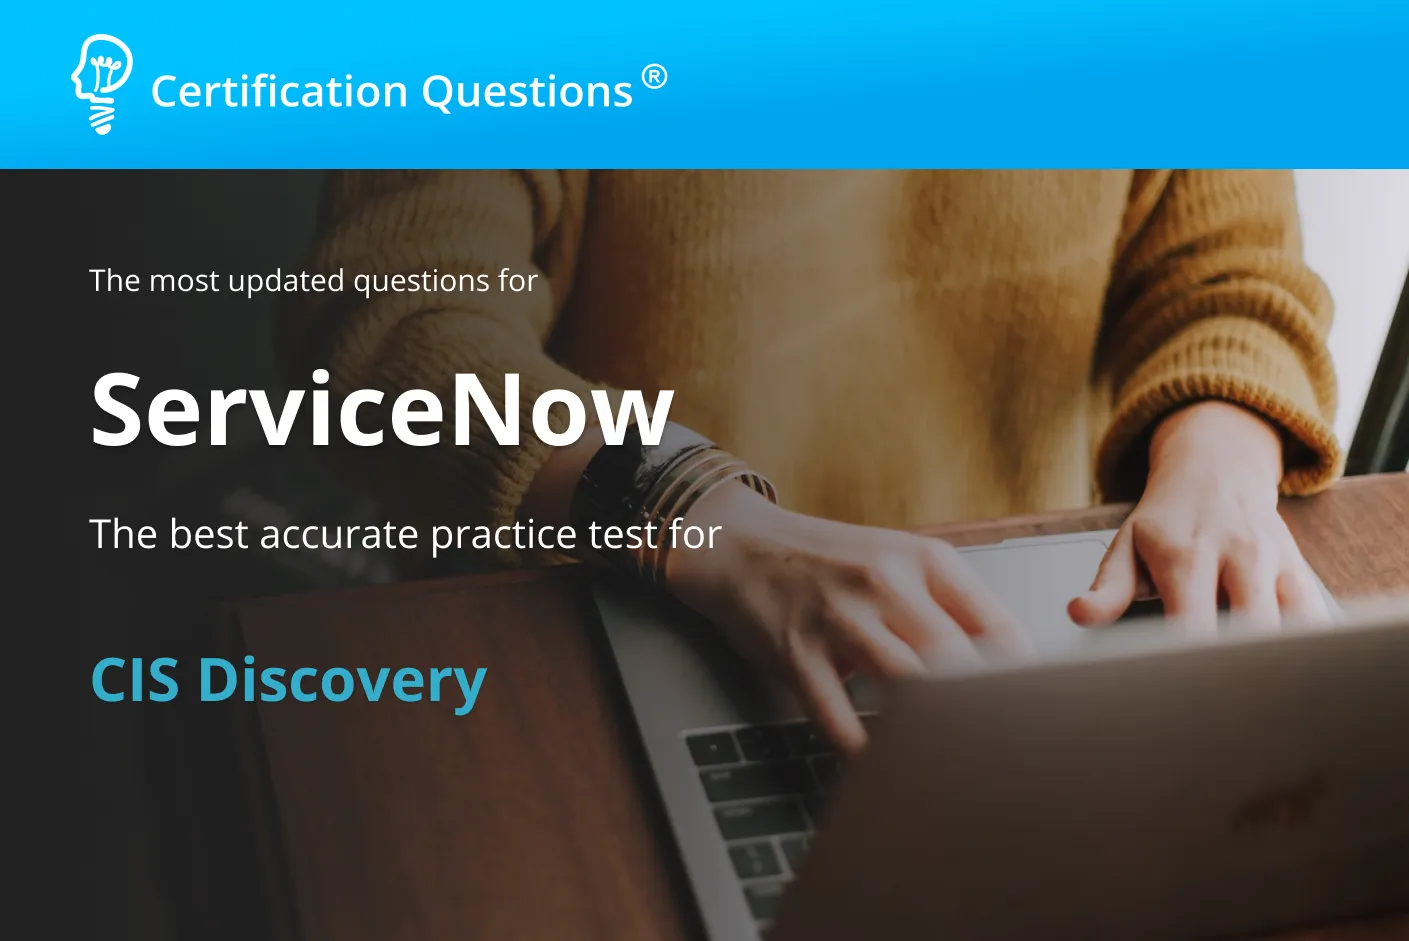 This image represents the Servicenow CIS-Discovery exam questions